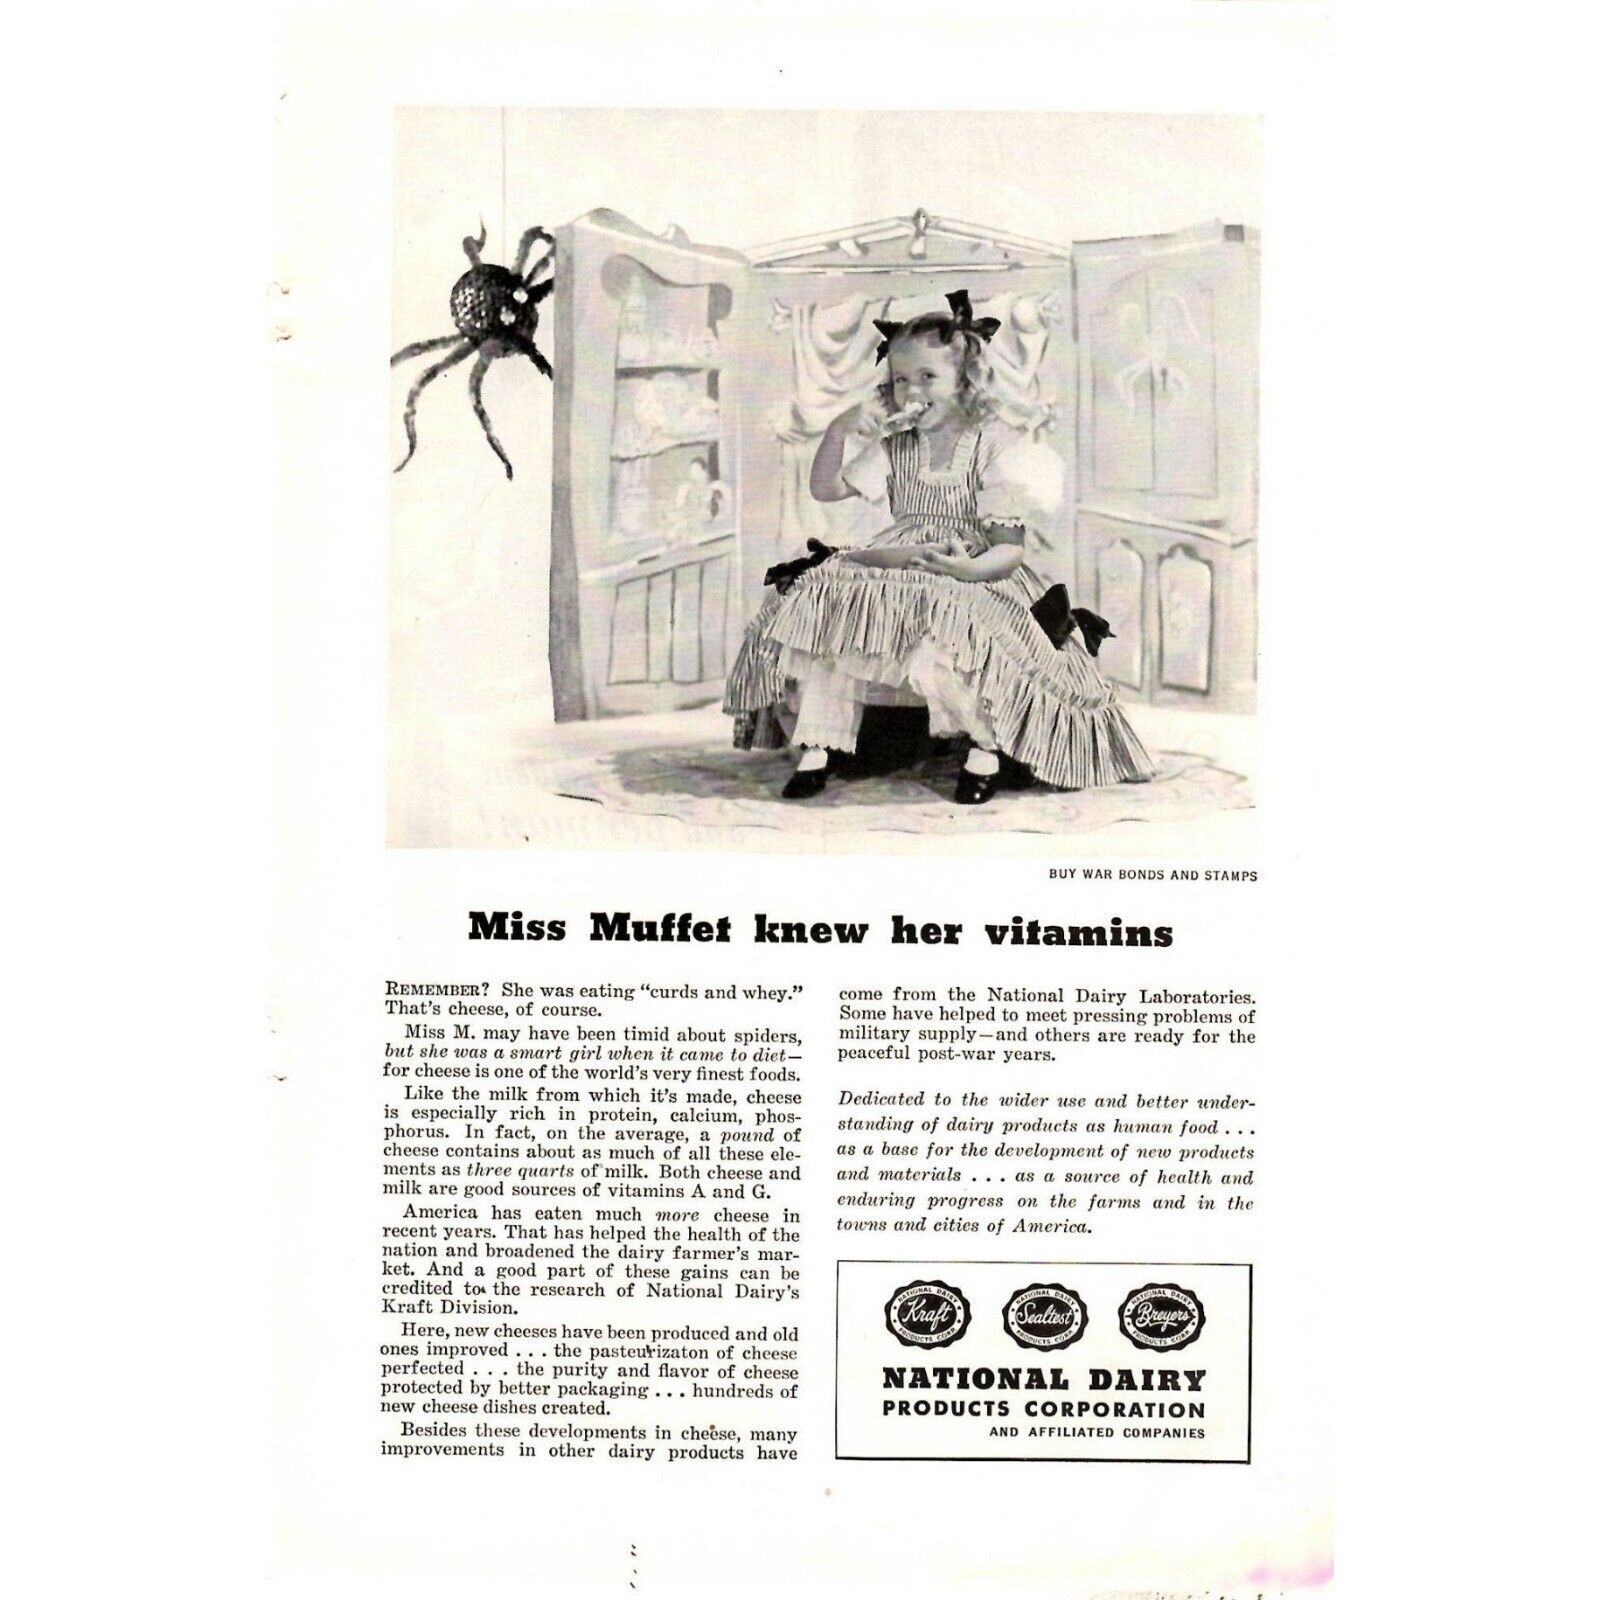 1945 National Dairy Products Corp Print Ad WWII Miss Muffet Knew her Vitamins